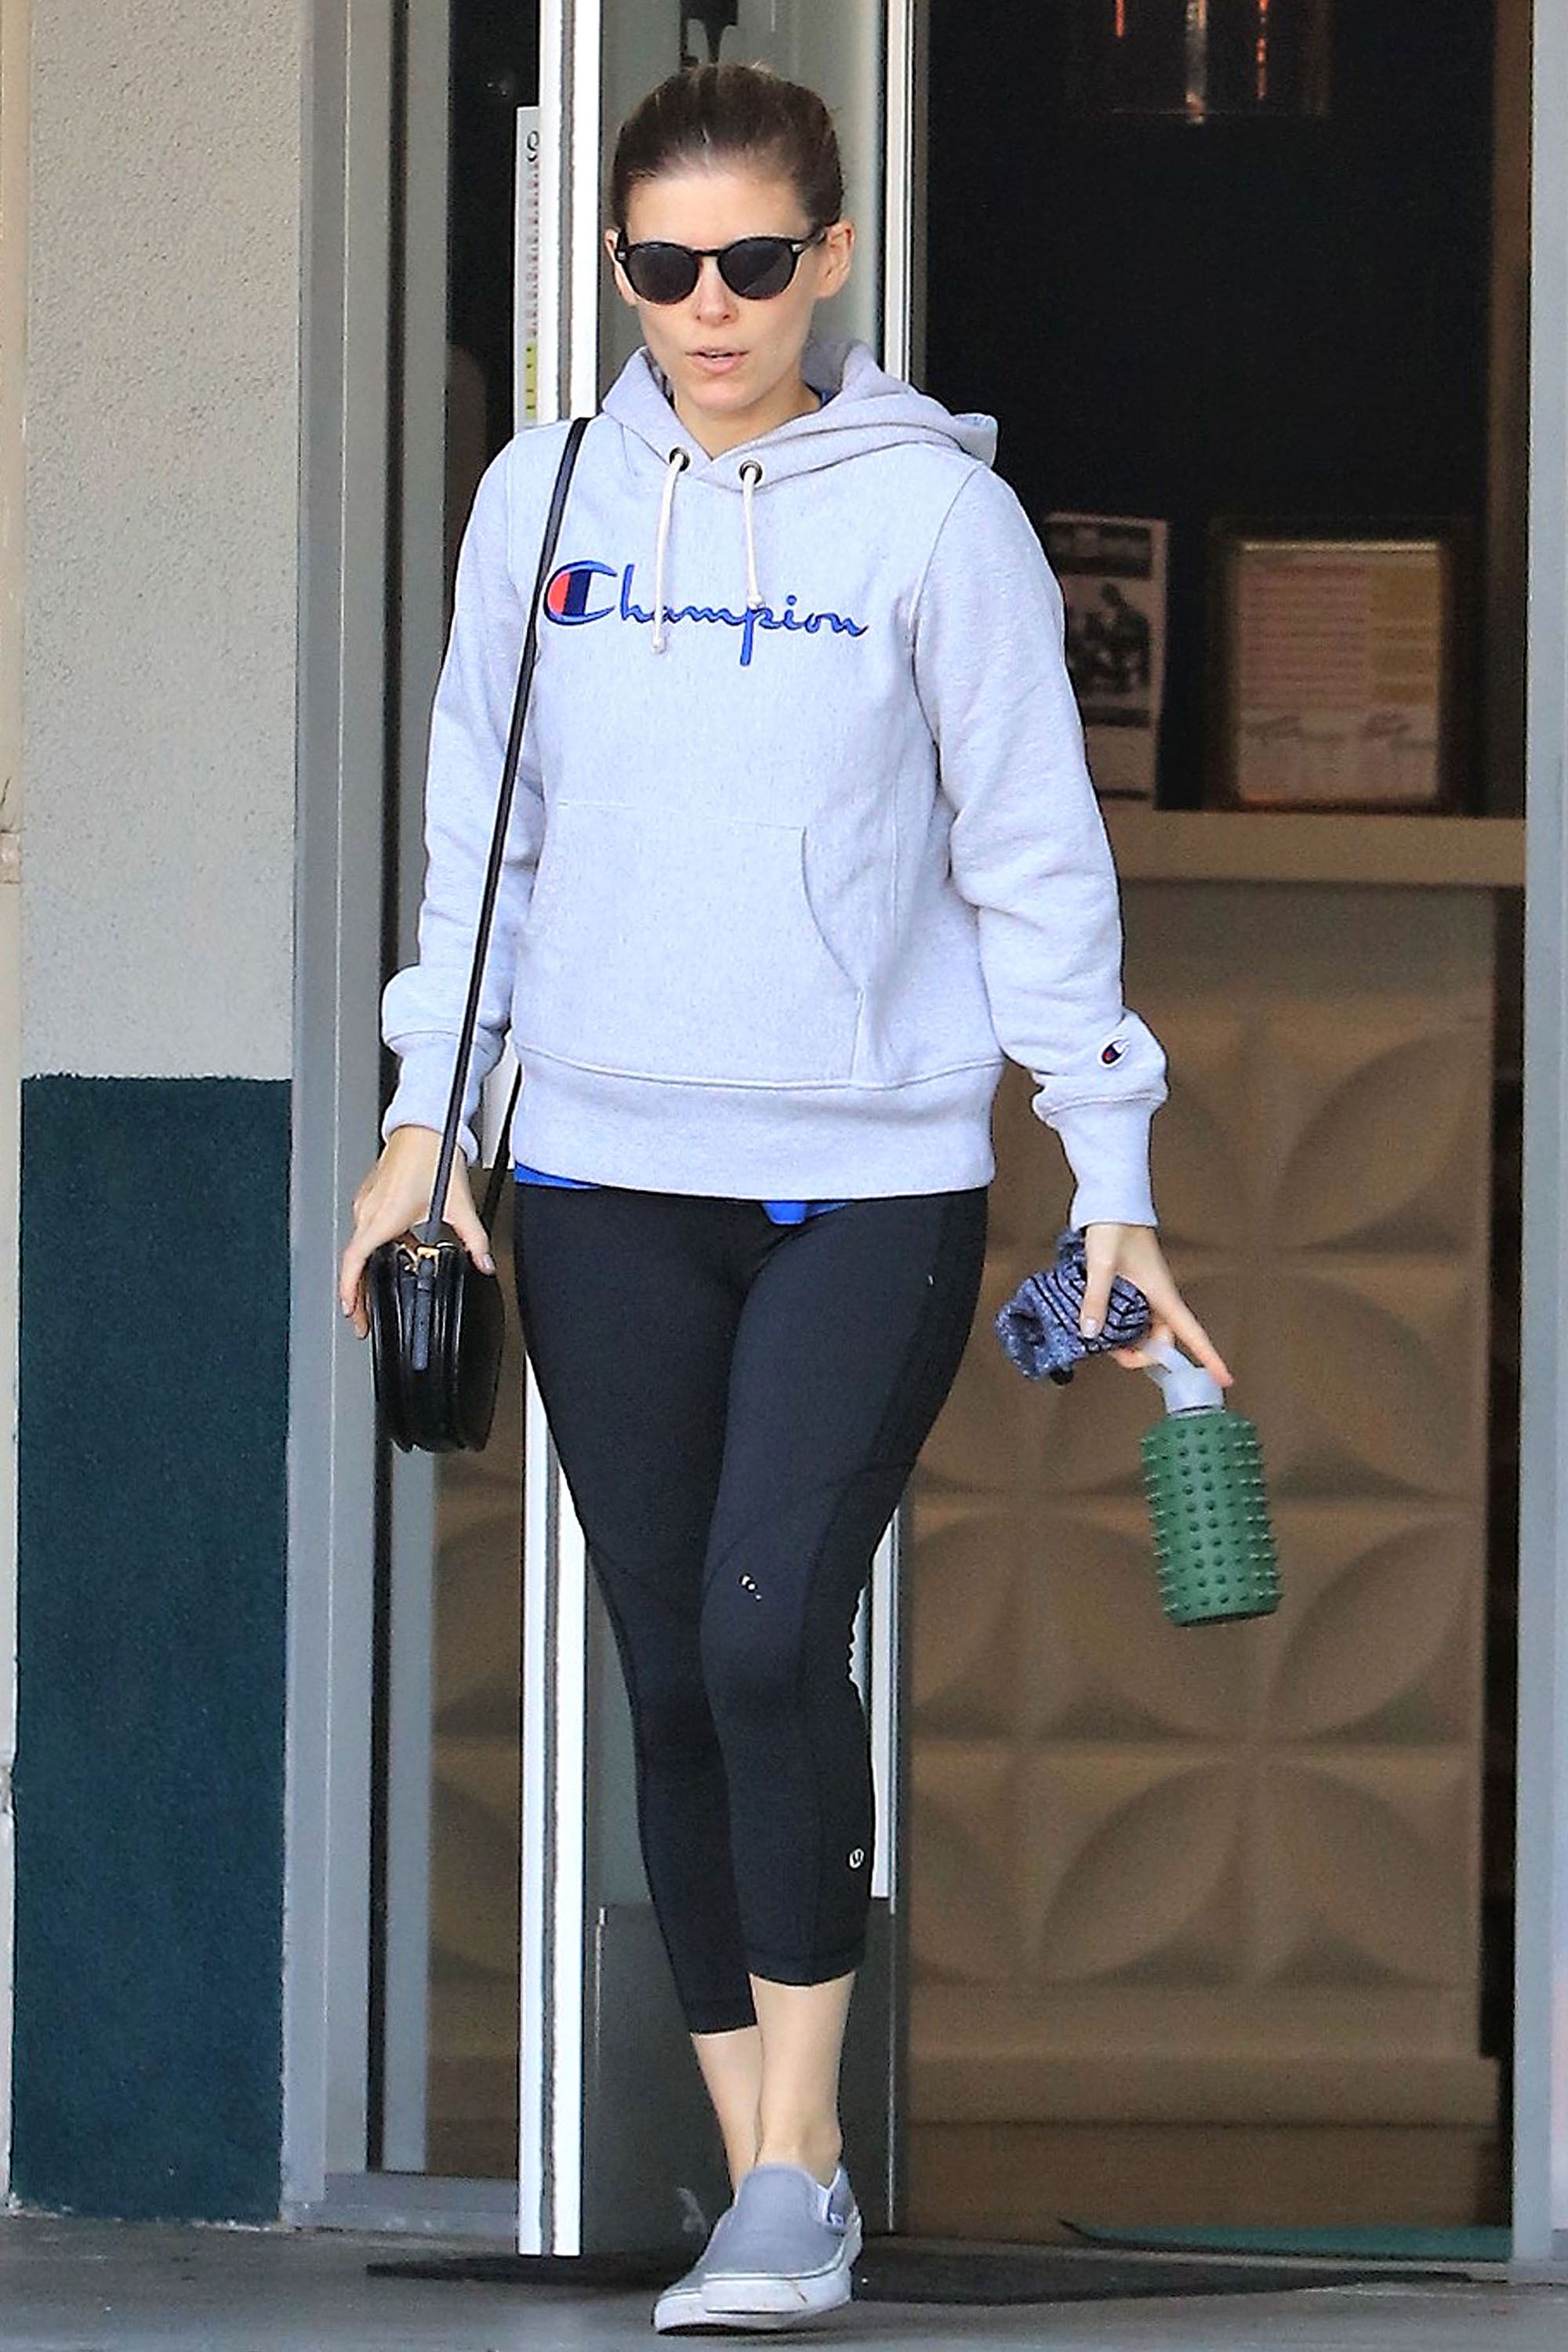 Celebrities Wearing Workout Clothes: See Their Gym Outfits – Hollywood Life